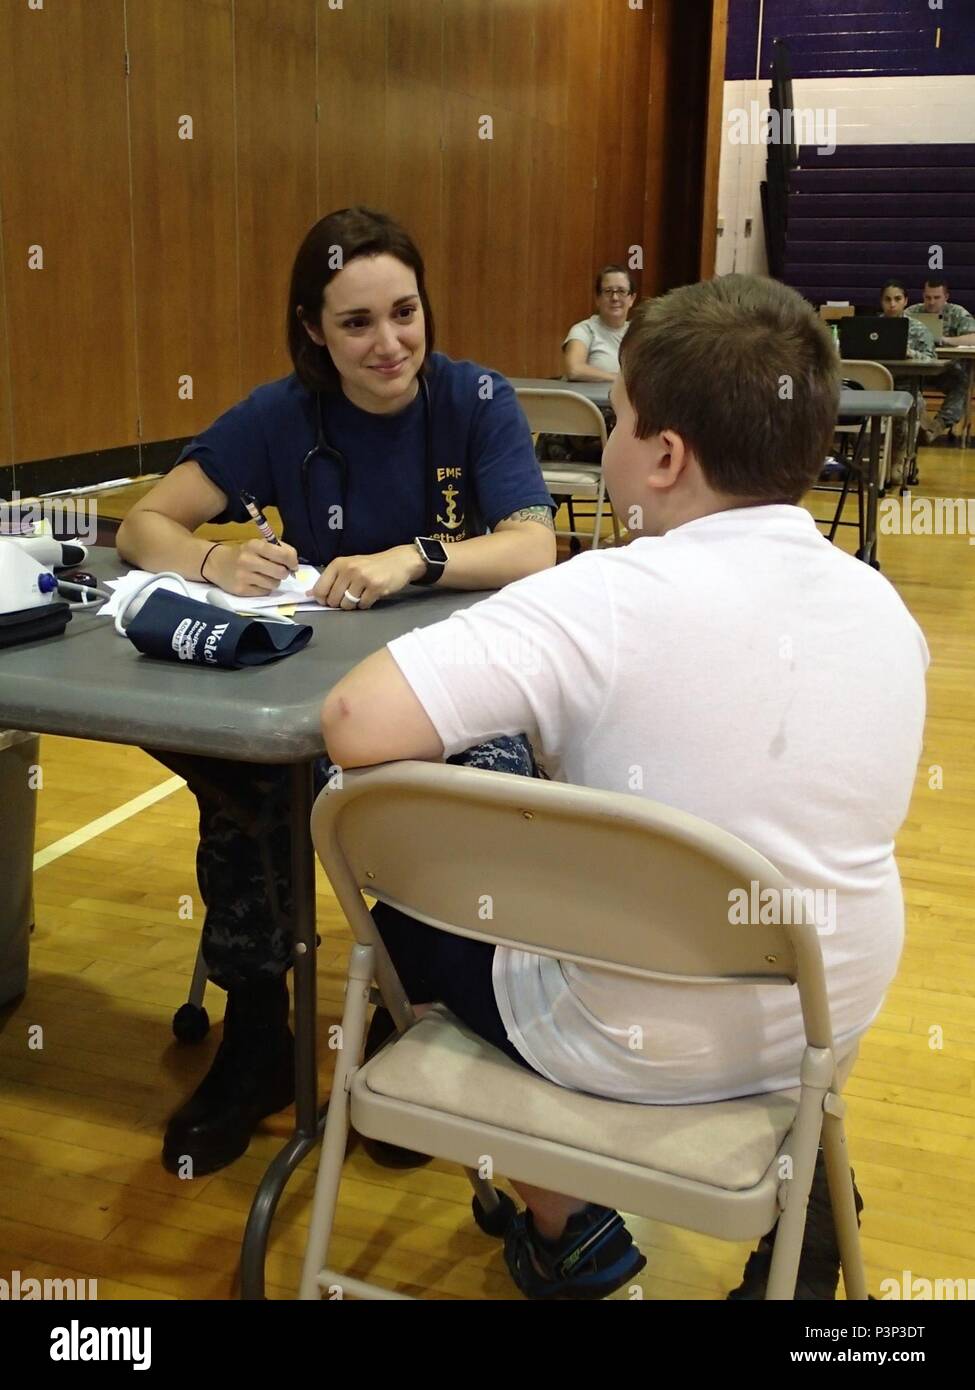 Lt. j.g. Kristen Van Meter, a nurse from Expeditionary Medical Facility Bethesda, Md., takes a patient’s information and vital signs during the Greater Chenango Cares Innovative Readiness Training event, July 21, 2016.  Greater Chenango Cares is one of the IRT events which provides real-world training in a joint civil-military environment while delivering world class, no-cost medical care to the people of Chenango County, N.Y., from July 15-24. Stock Photo